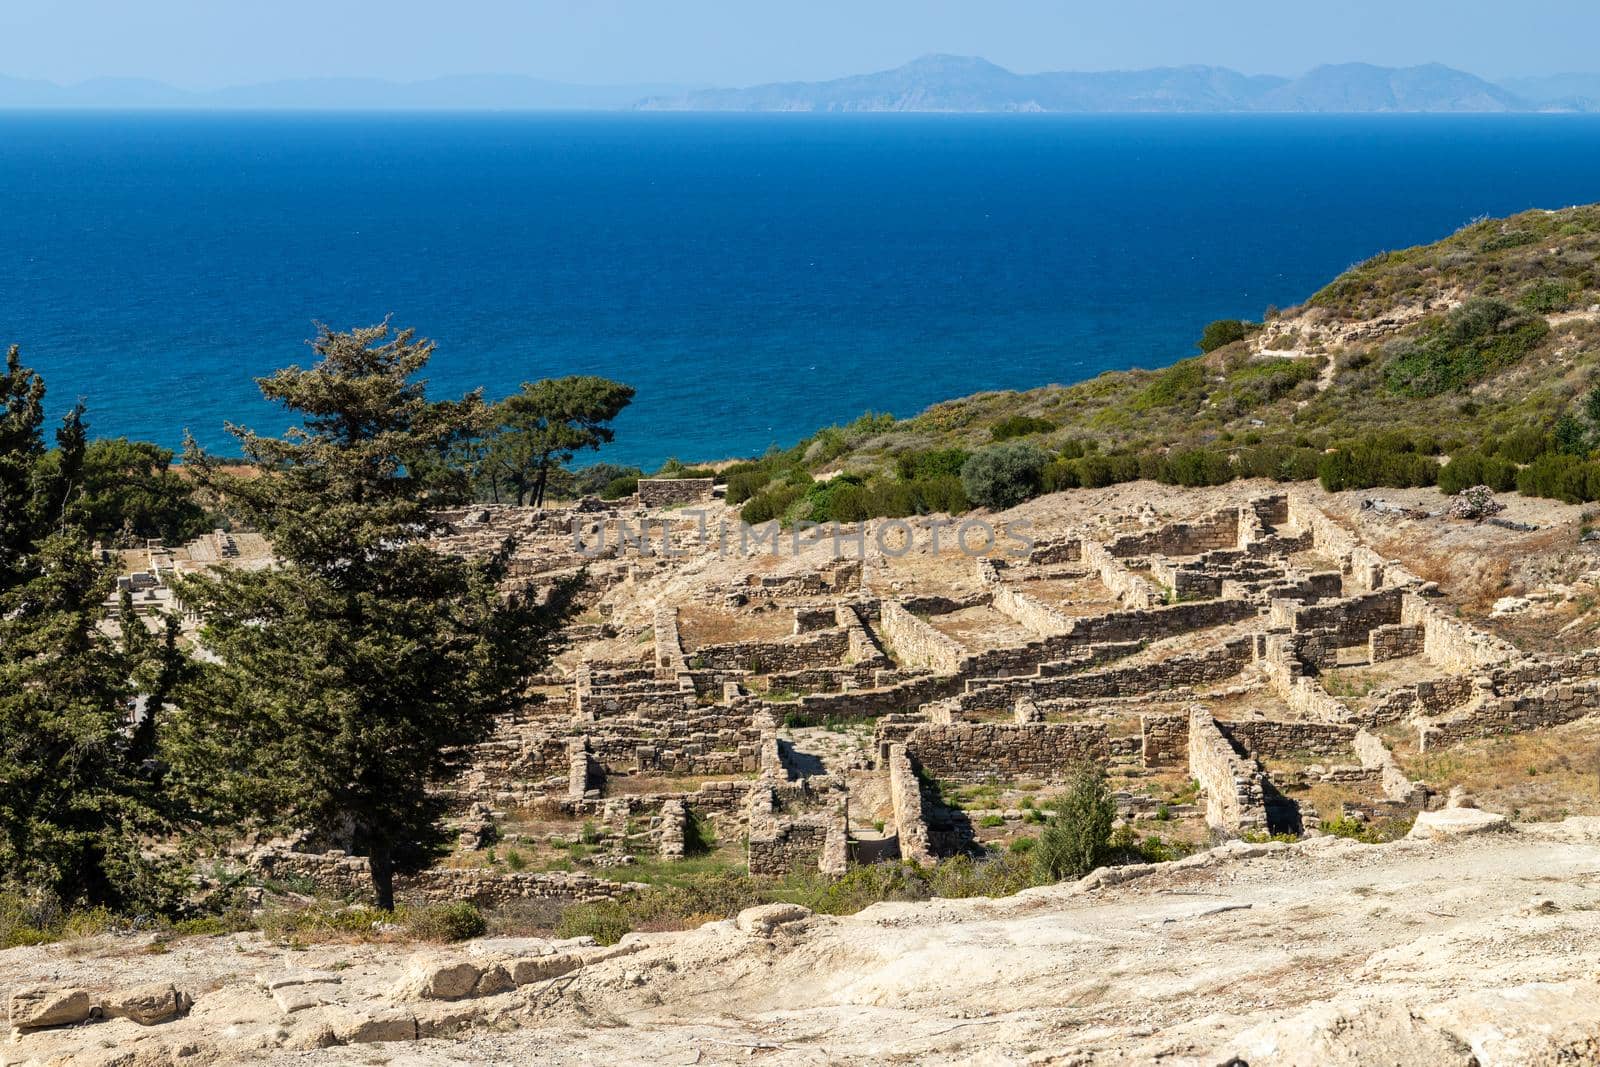 View from excavation site of the ancient city of Kamiros at the westside of Rhodes island, Greece on the aegaen sea